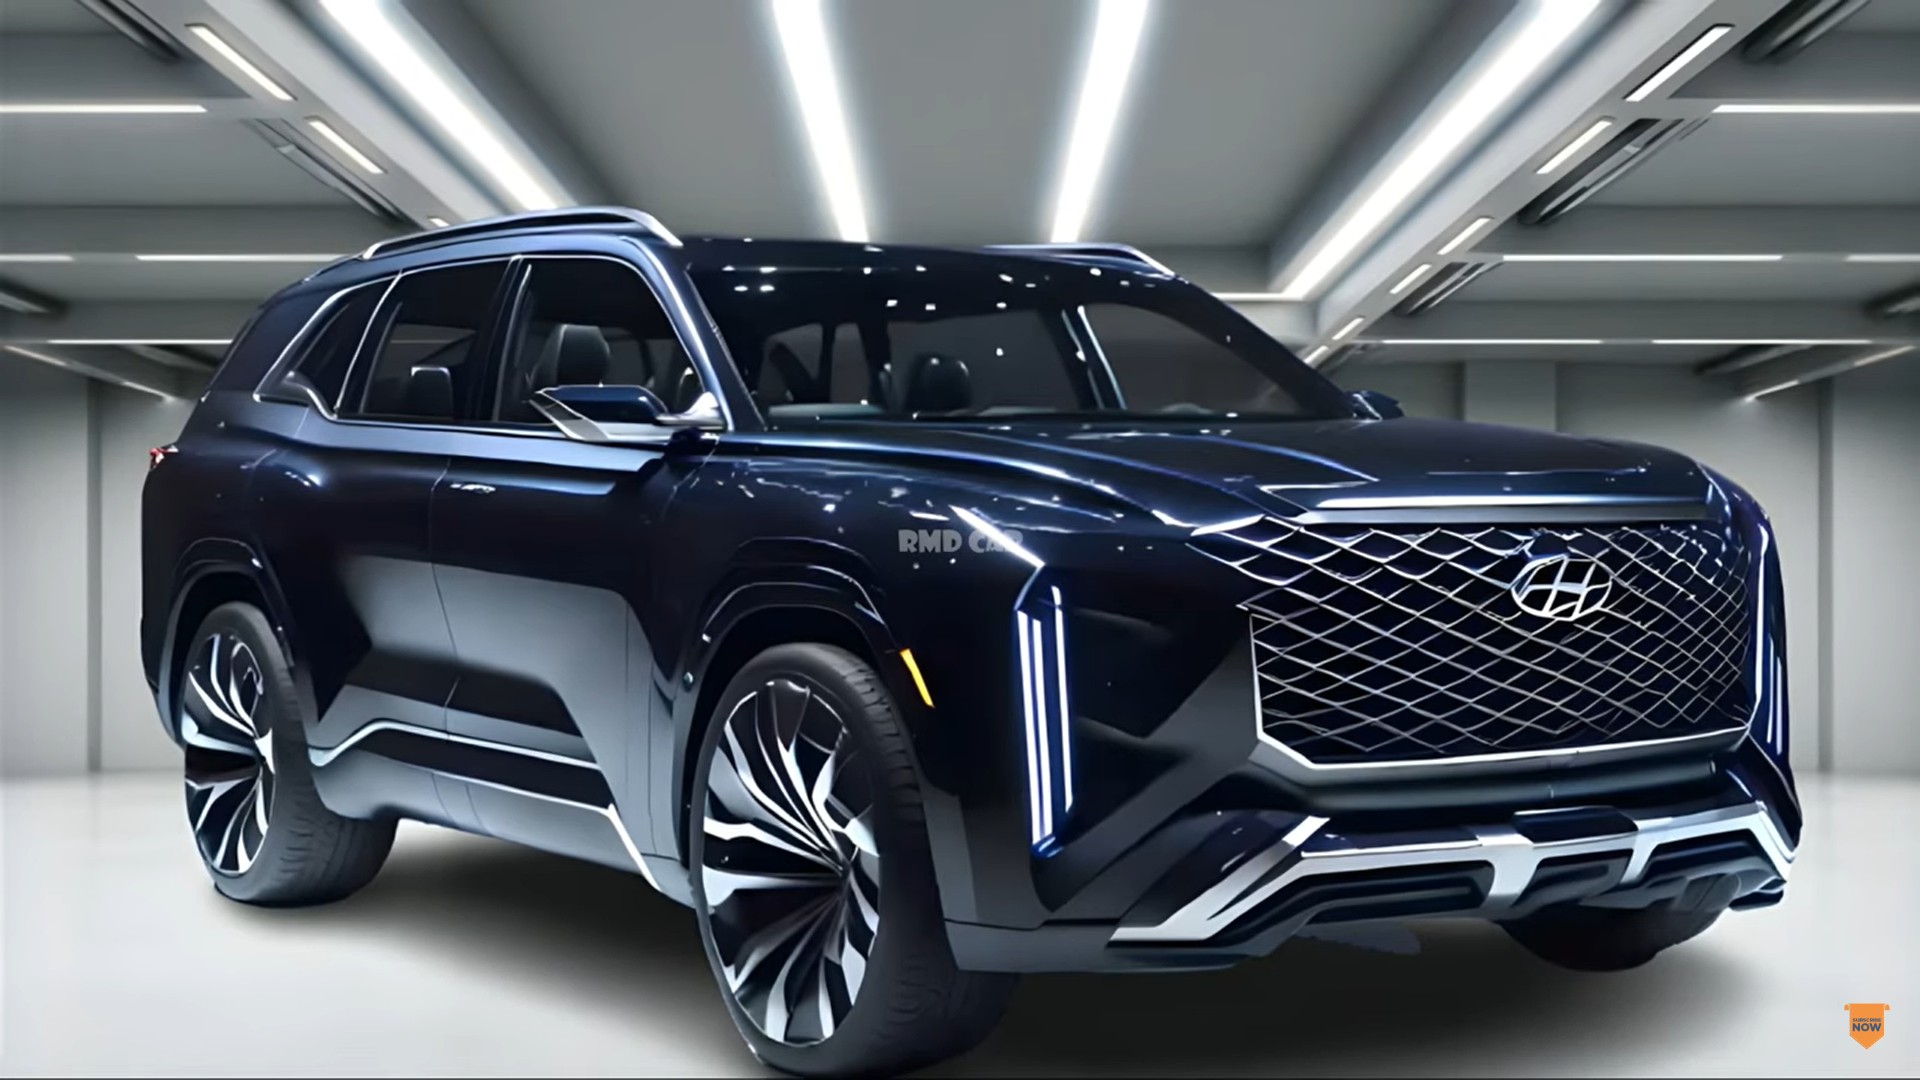 Big Hyundai Palisade Family SUV Gets Another Facelift, Albeit Only in